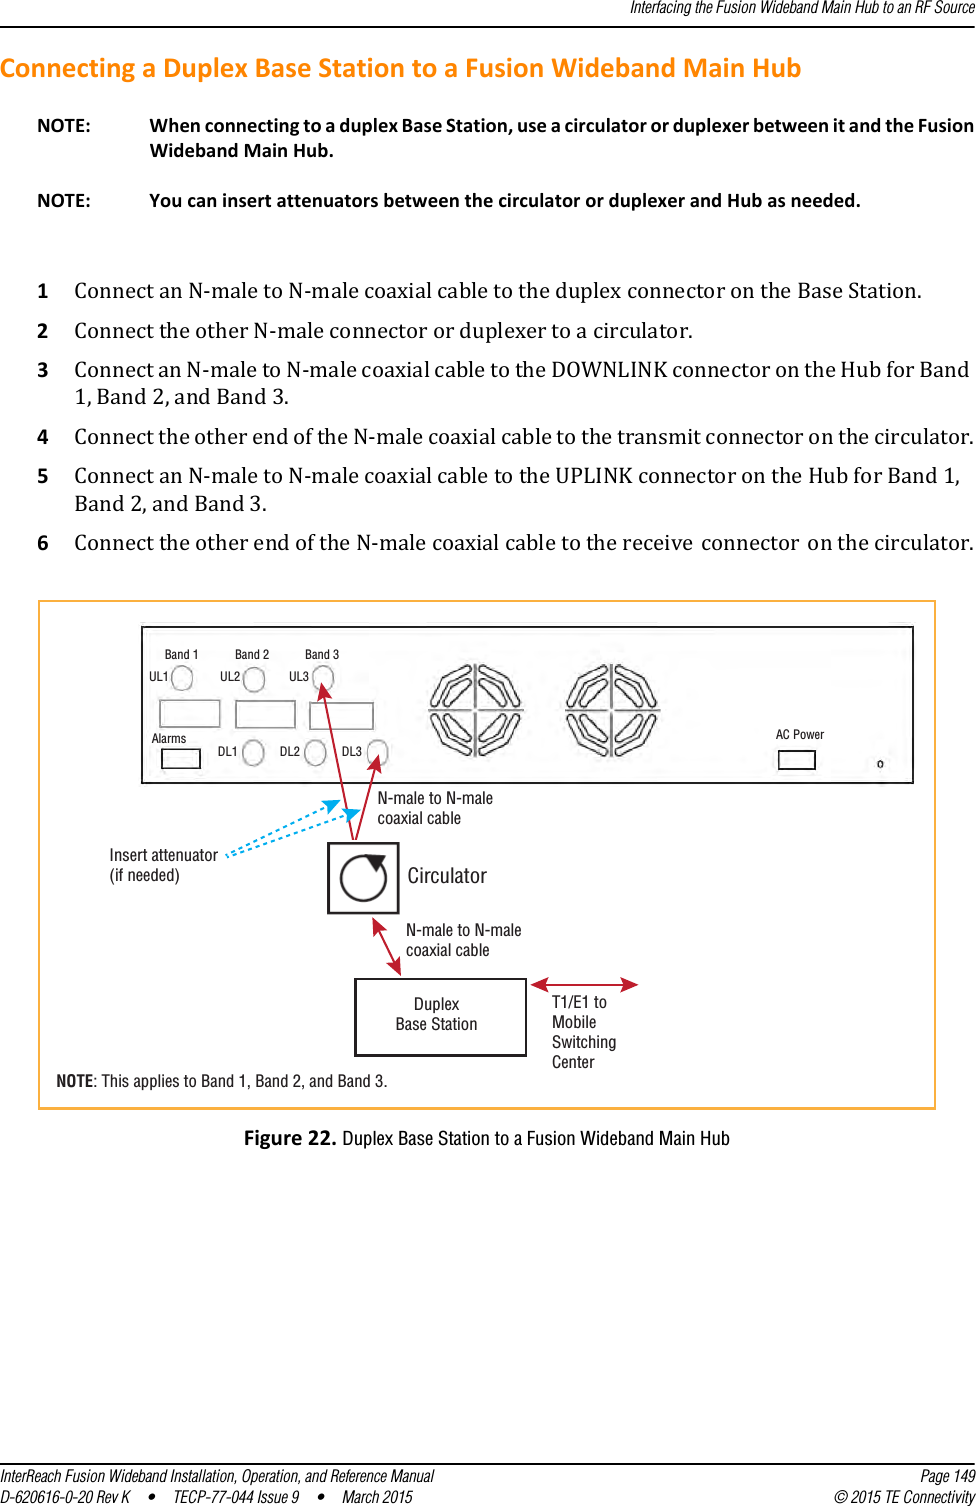 Interfacing the Fusion Wideband Main Hub to an RF SourceInterReach Fusion Wideband Installation, Operation, and Reference Manual Page 149D-620616-0-20 Rev K  •  TECP-77-044 Issue 9  •  March 2015 © 2015 TE ConnectivityConnecting a Duplex Base Station to a Fusion Wideband Main HubNOTE: When connecting to a duplex Base Station, use a circulator or duplexer between it and the Fusion Wideband Main Hub.NOTE: You can insert attenuators between the circulator or duplexer and Hub as needed.1Connect an N-male to N-male coaxial cable to the duplex connector on the Base Station.2Connect the other N-male connector or duplexer to a circulator.3Connect an N-male to N-male coaxial cable to the DOWNLINK connector on the Hub for Band 1, Band 2, and Band 3.4Connect the other end of the N-male coaxial cable to the transmit connector on the circulator.5Connect an N-male to N-male coaxial cable to the UPLINK connector on the Hub for Band 1, Band 2, and Band 3.6Connect the other end of the N-male coaxial cable to the receive connector on the circulator.Figure 22. Duplex Base Station to a Fusion Wideband Main Hub DuplexBase StationBand 1 Band 2 Band 3UL1 UL2 UL3AlarmsDL1 DL2 DL3AC PowerN-male to N-malecoaxial cableT1/E1 toMobileSwitchingCenterInsert attenuator(if needed)NOTE: This applies to Band 1, Band 2, and Band 3.CirculatorN-male to N-malecoaxial cable